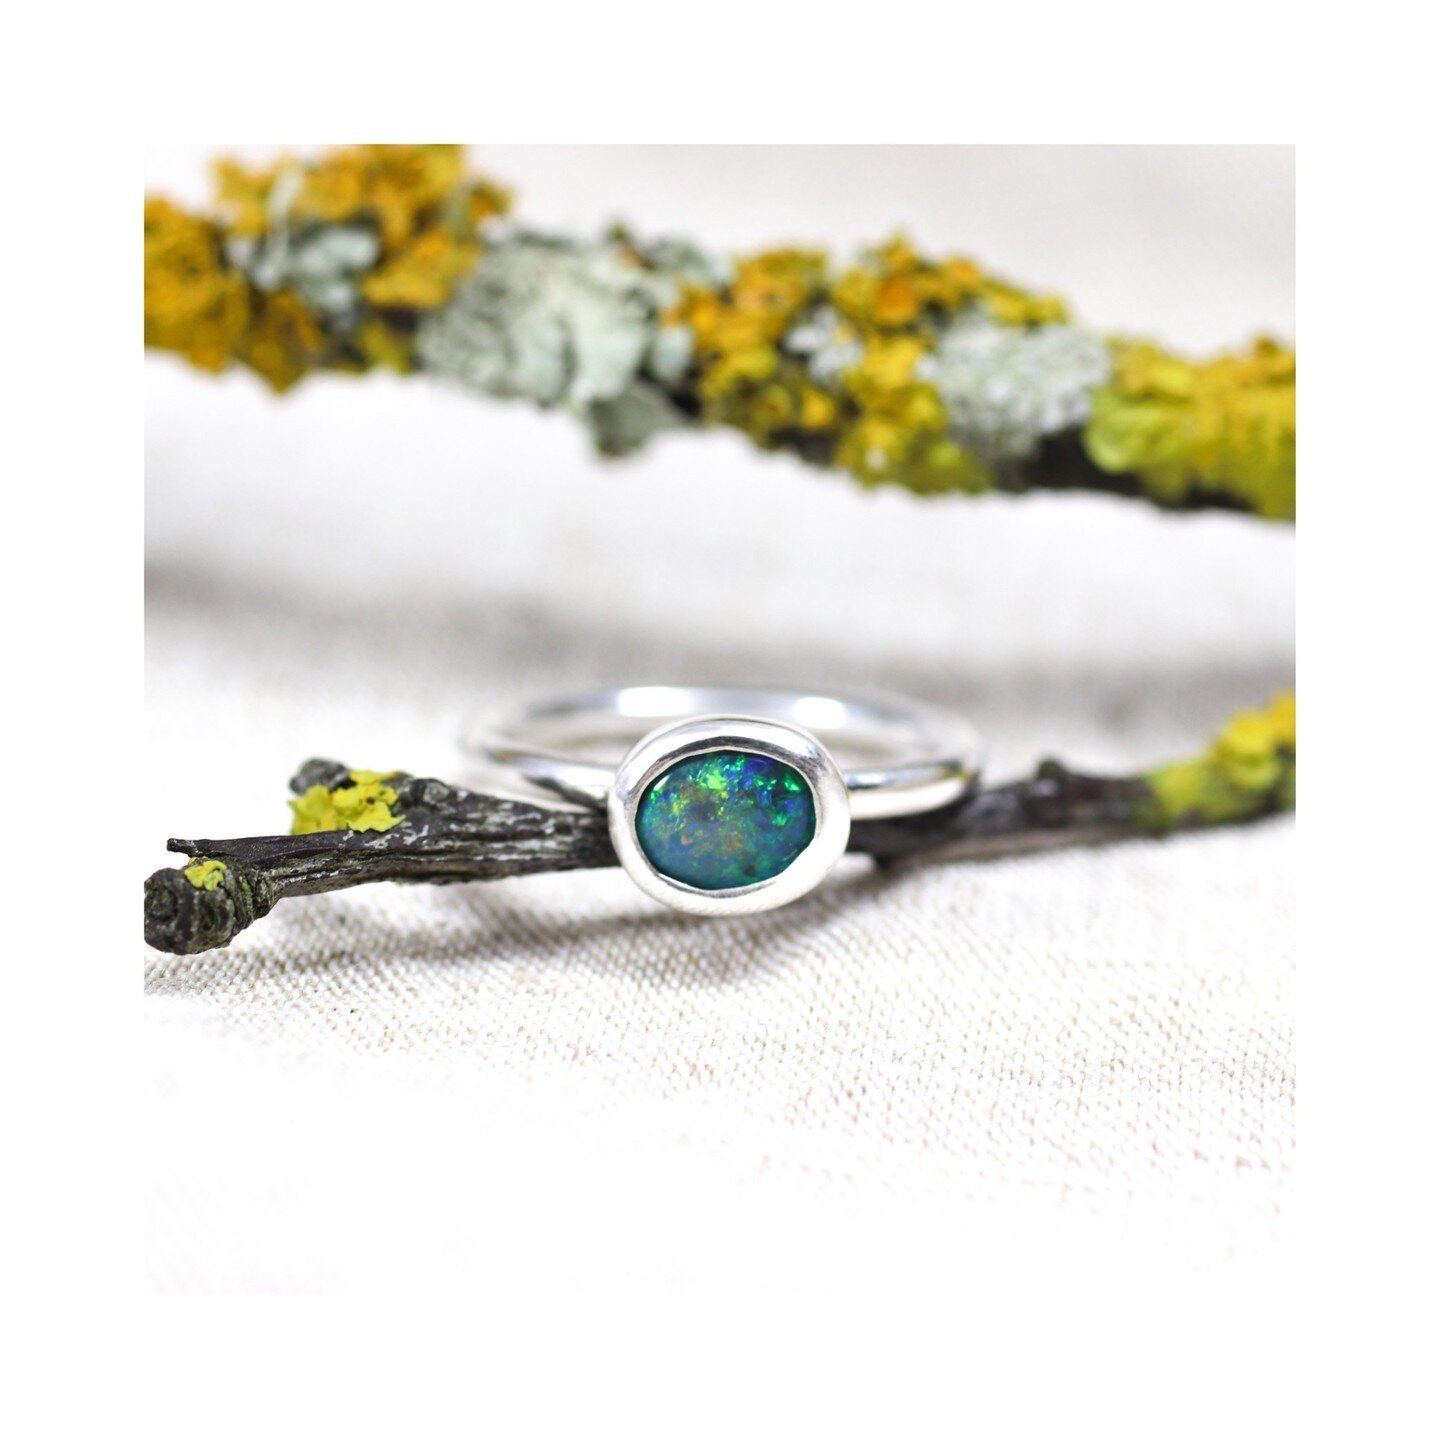 💙💚💛💙💚💛

Now available on our website | Sustainably handcrafted | Sterling Silver | Australian black opal | FREE express shipping within Australia for Christmas up until 20 Dec

#blackopal #carbonneutral #arborjewellery #sustainablefashion